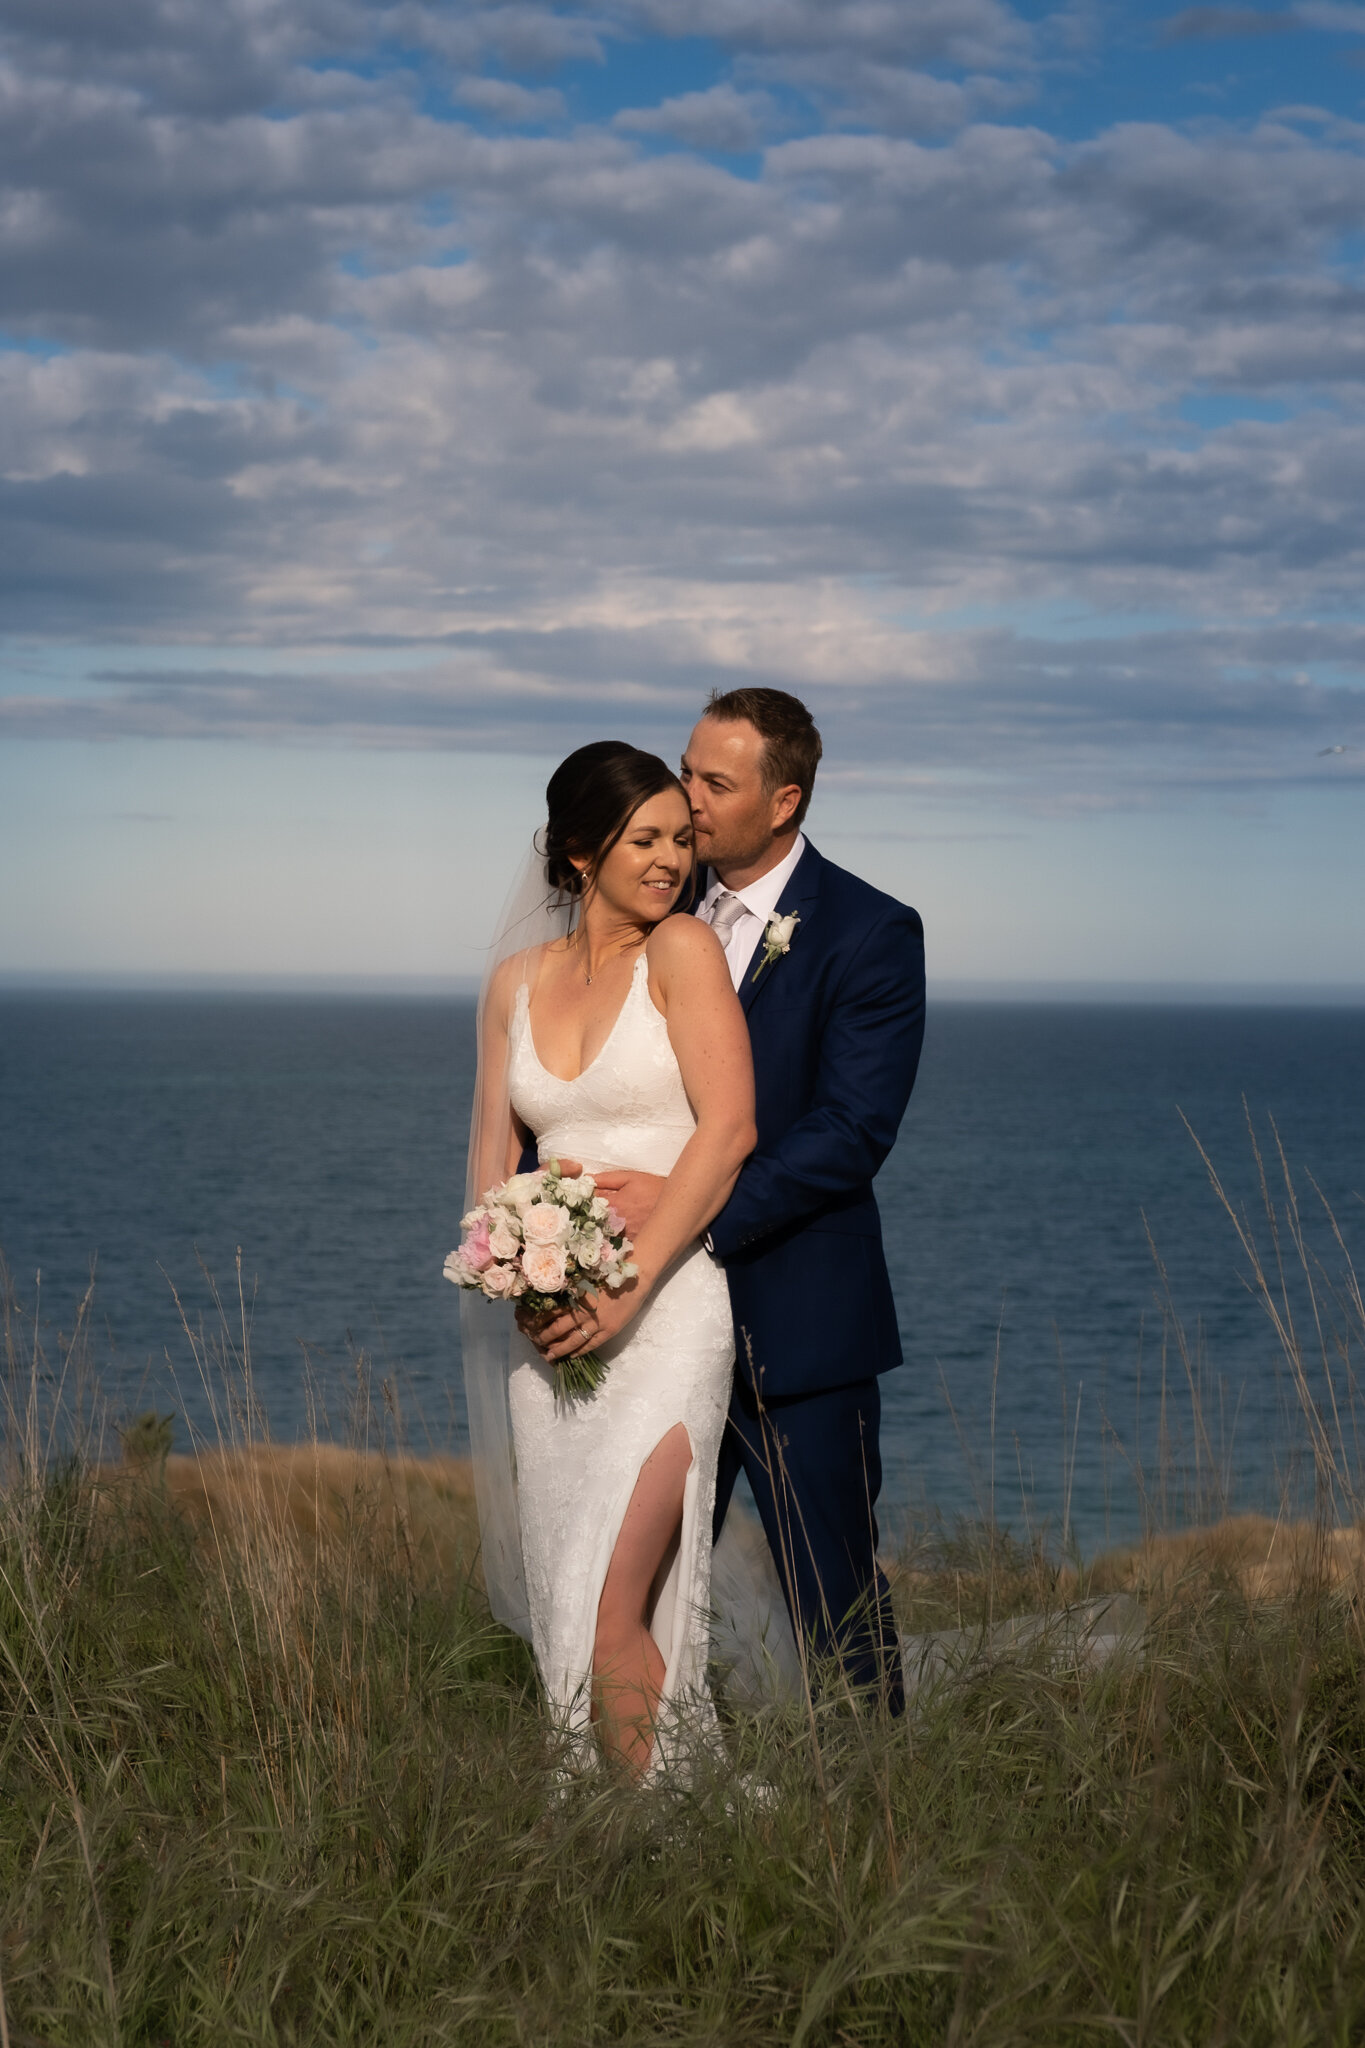 weddings at the farm cape kidnappers nz